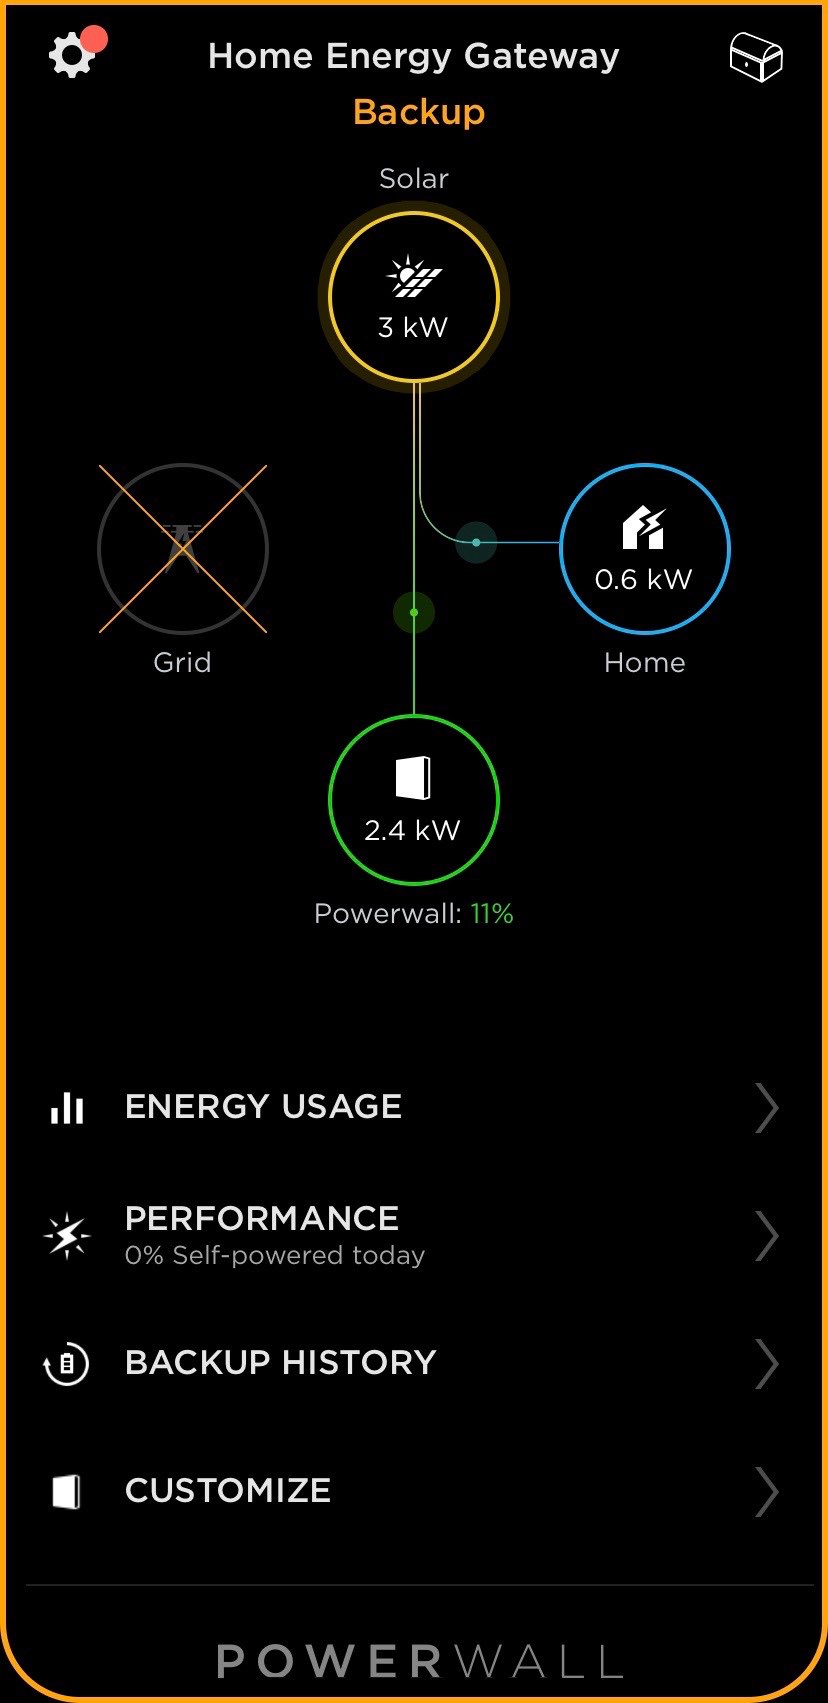 Grid outages are handled differently in the app, with a large X over the grid connection.